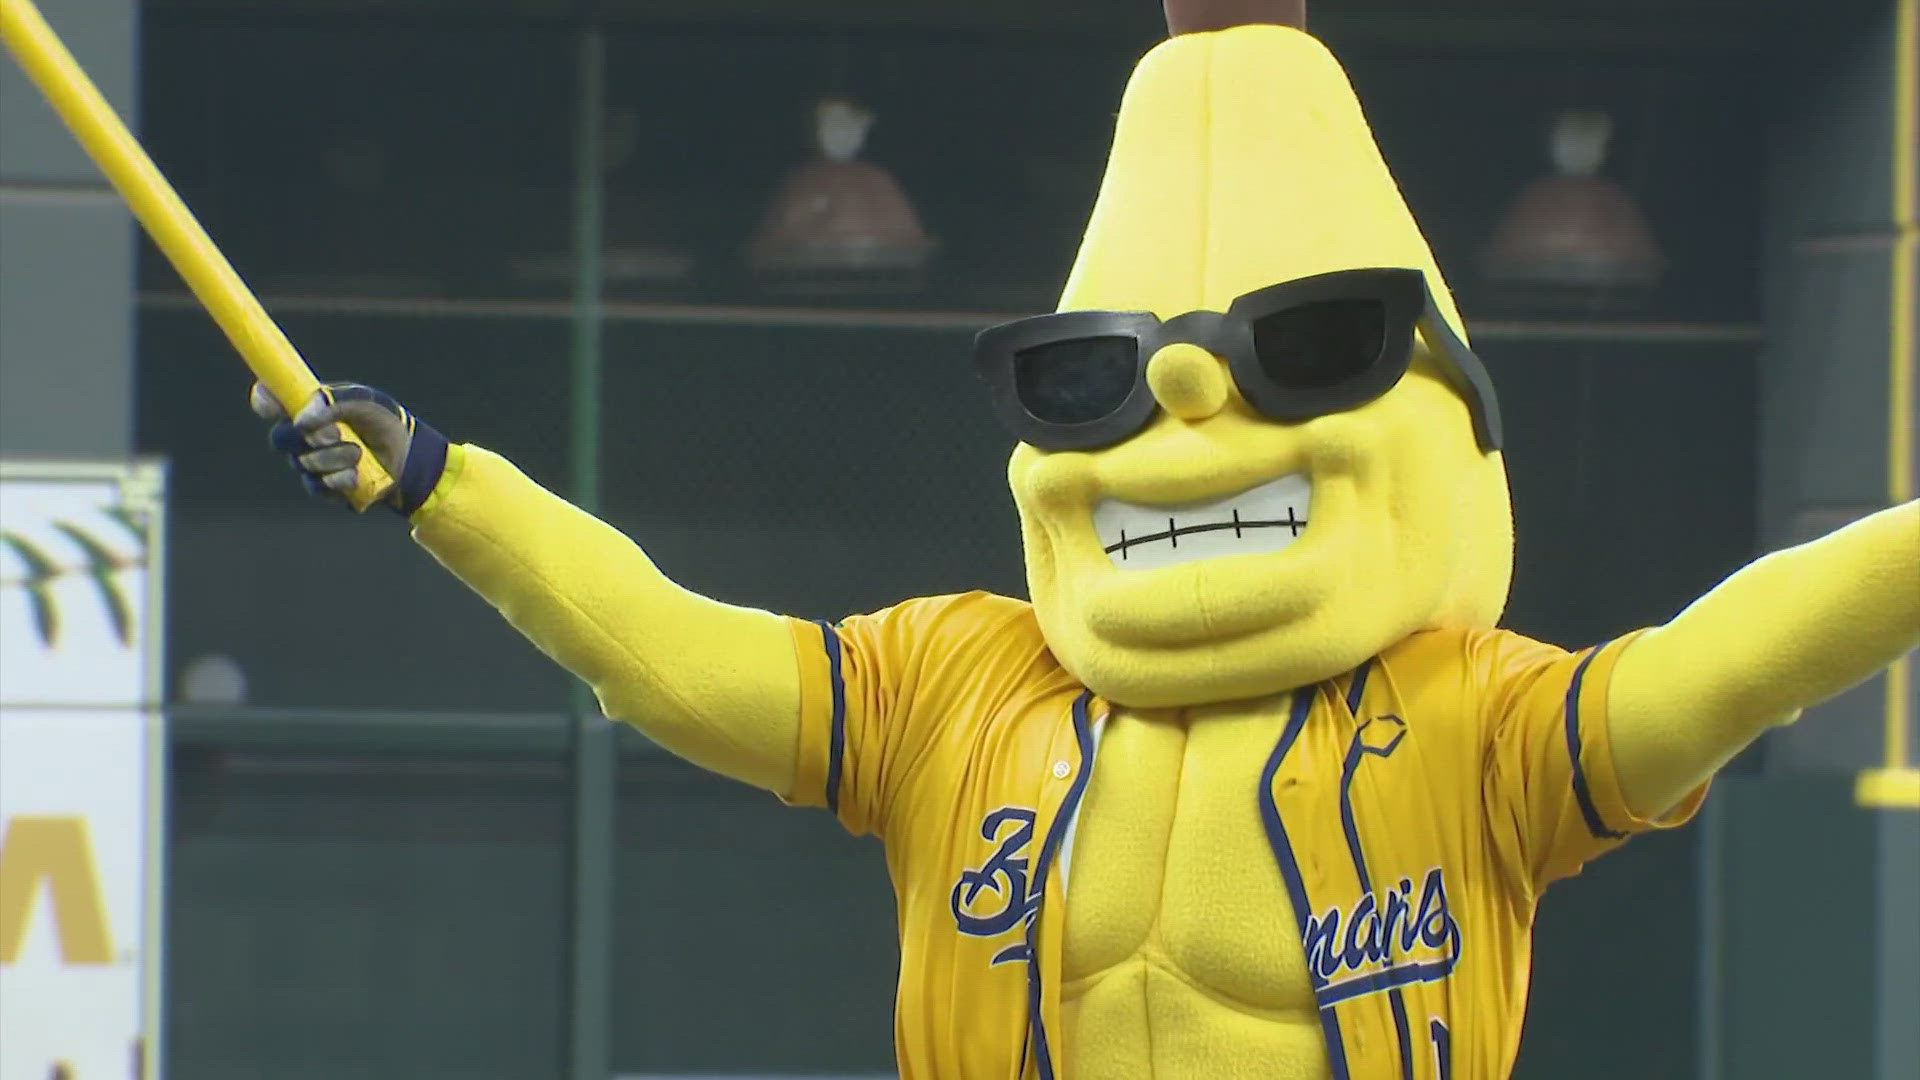 Thousands attended the event Saturday, traveling from all over to see the Savannah Bananas play.